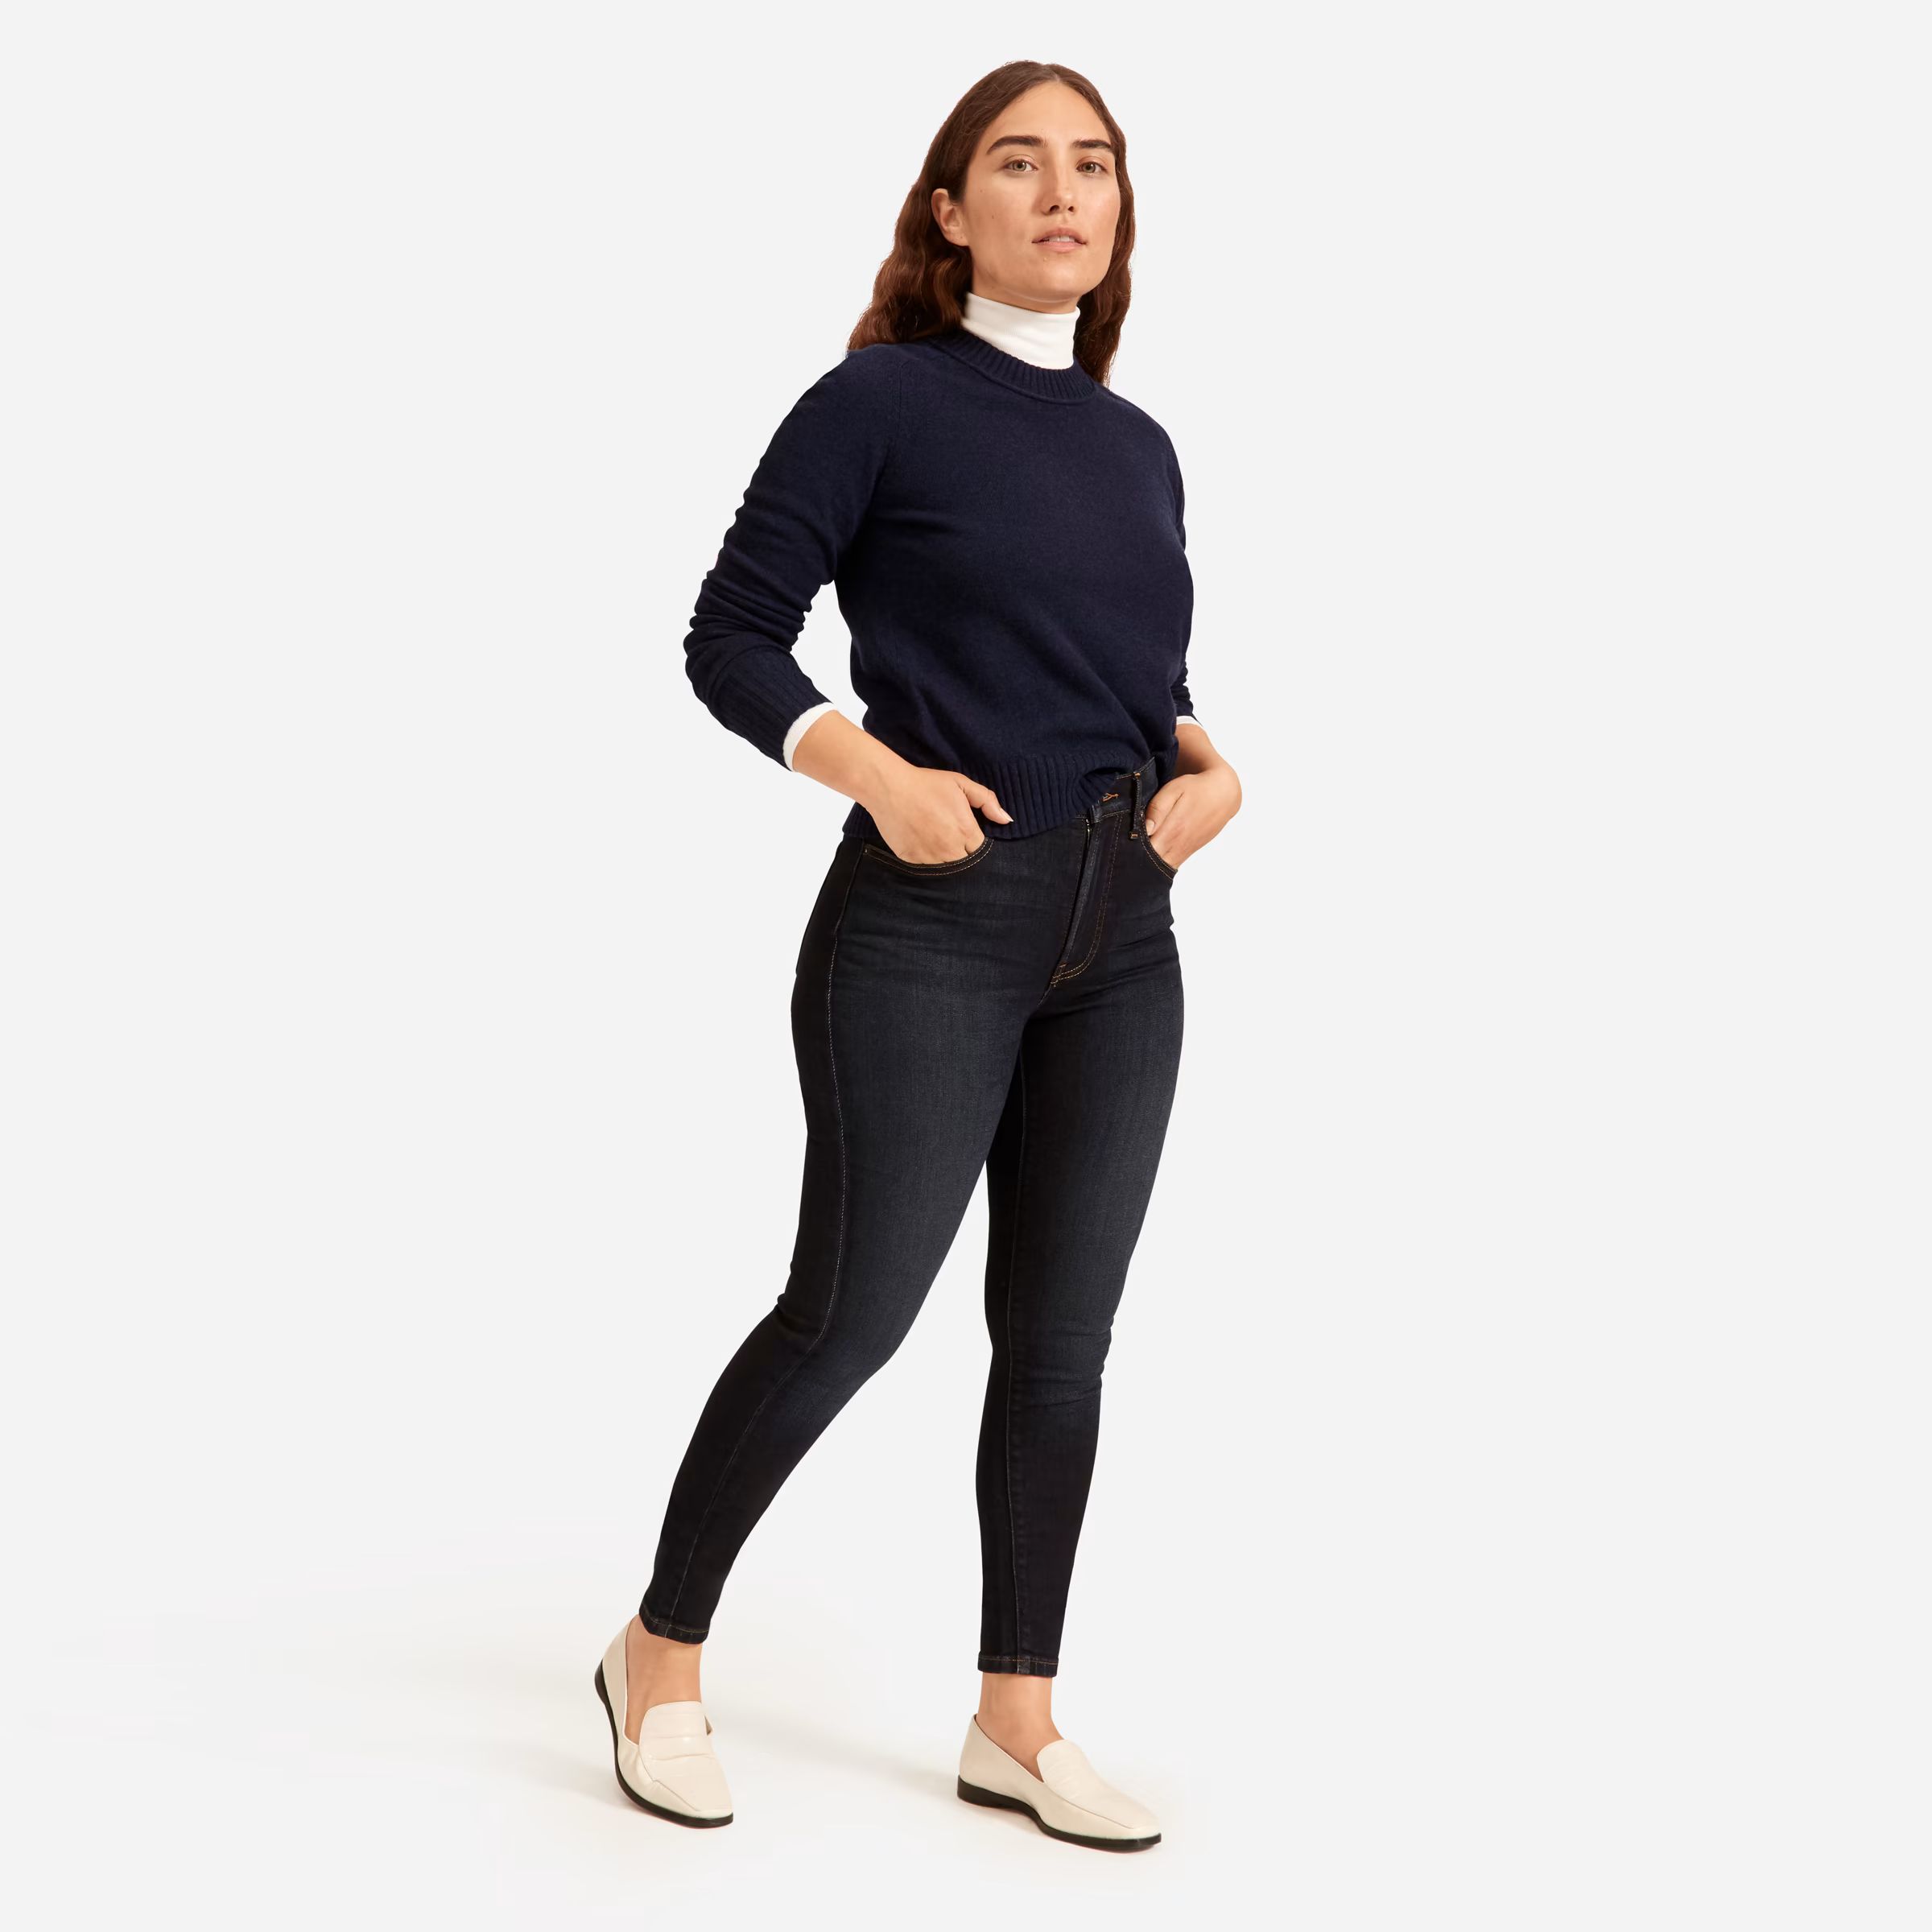 Authentic Stretch High-Rise Skinny — $68 $50 | Everlane